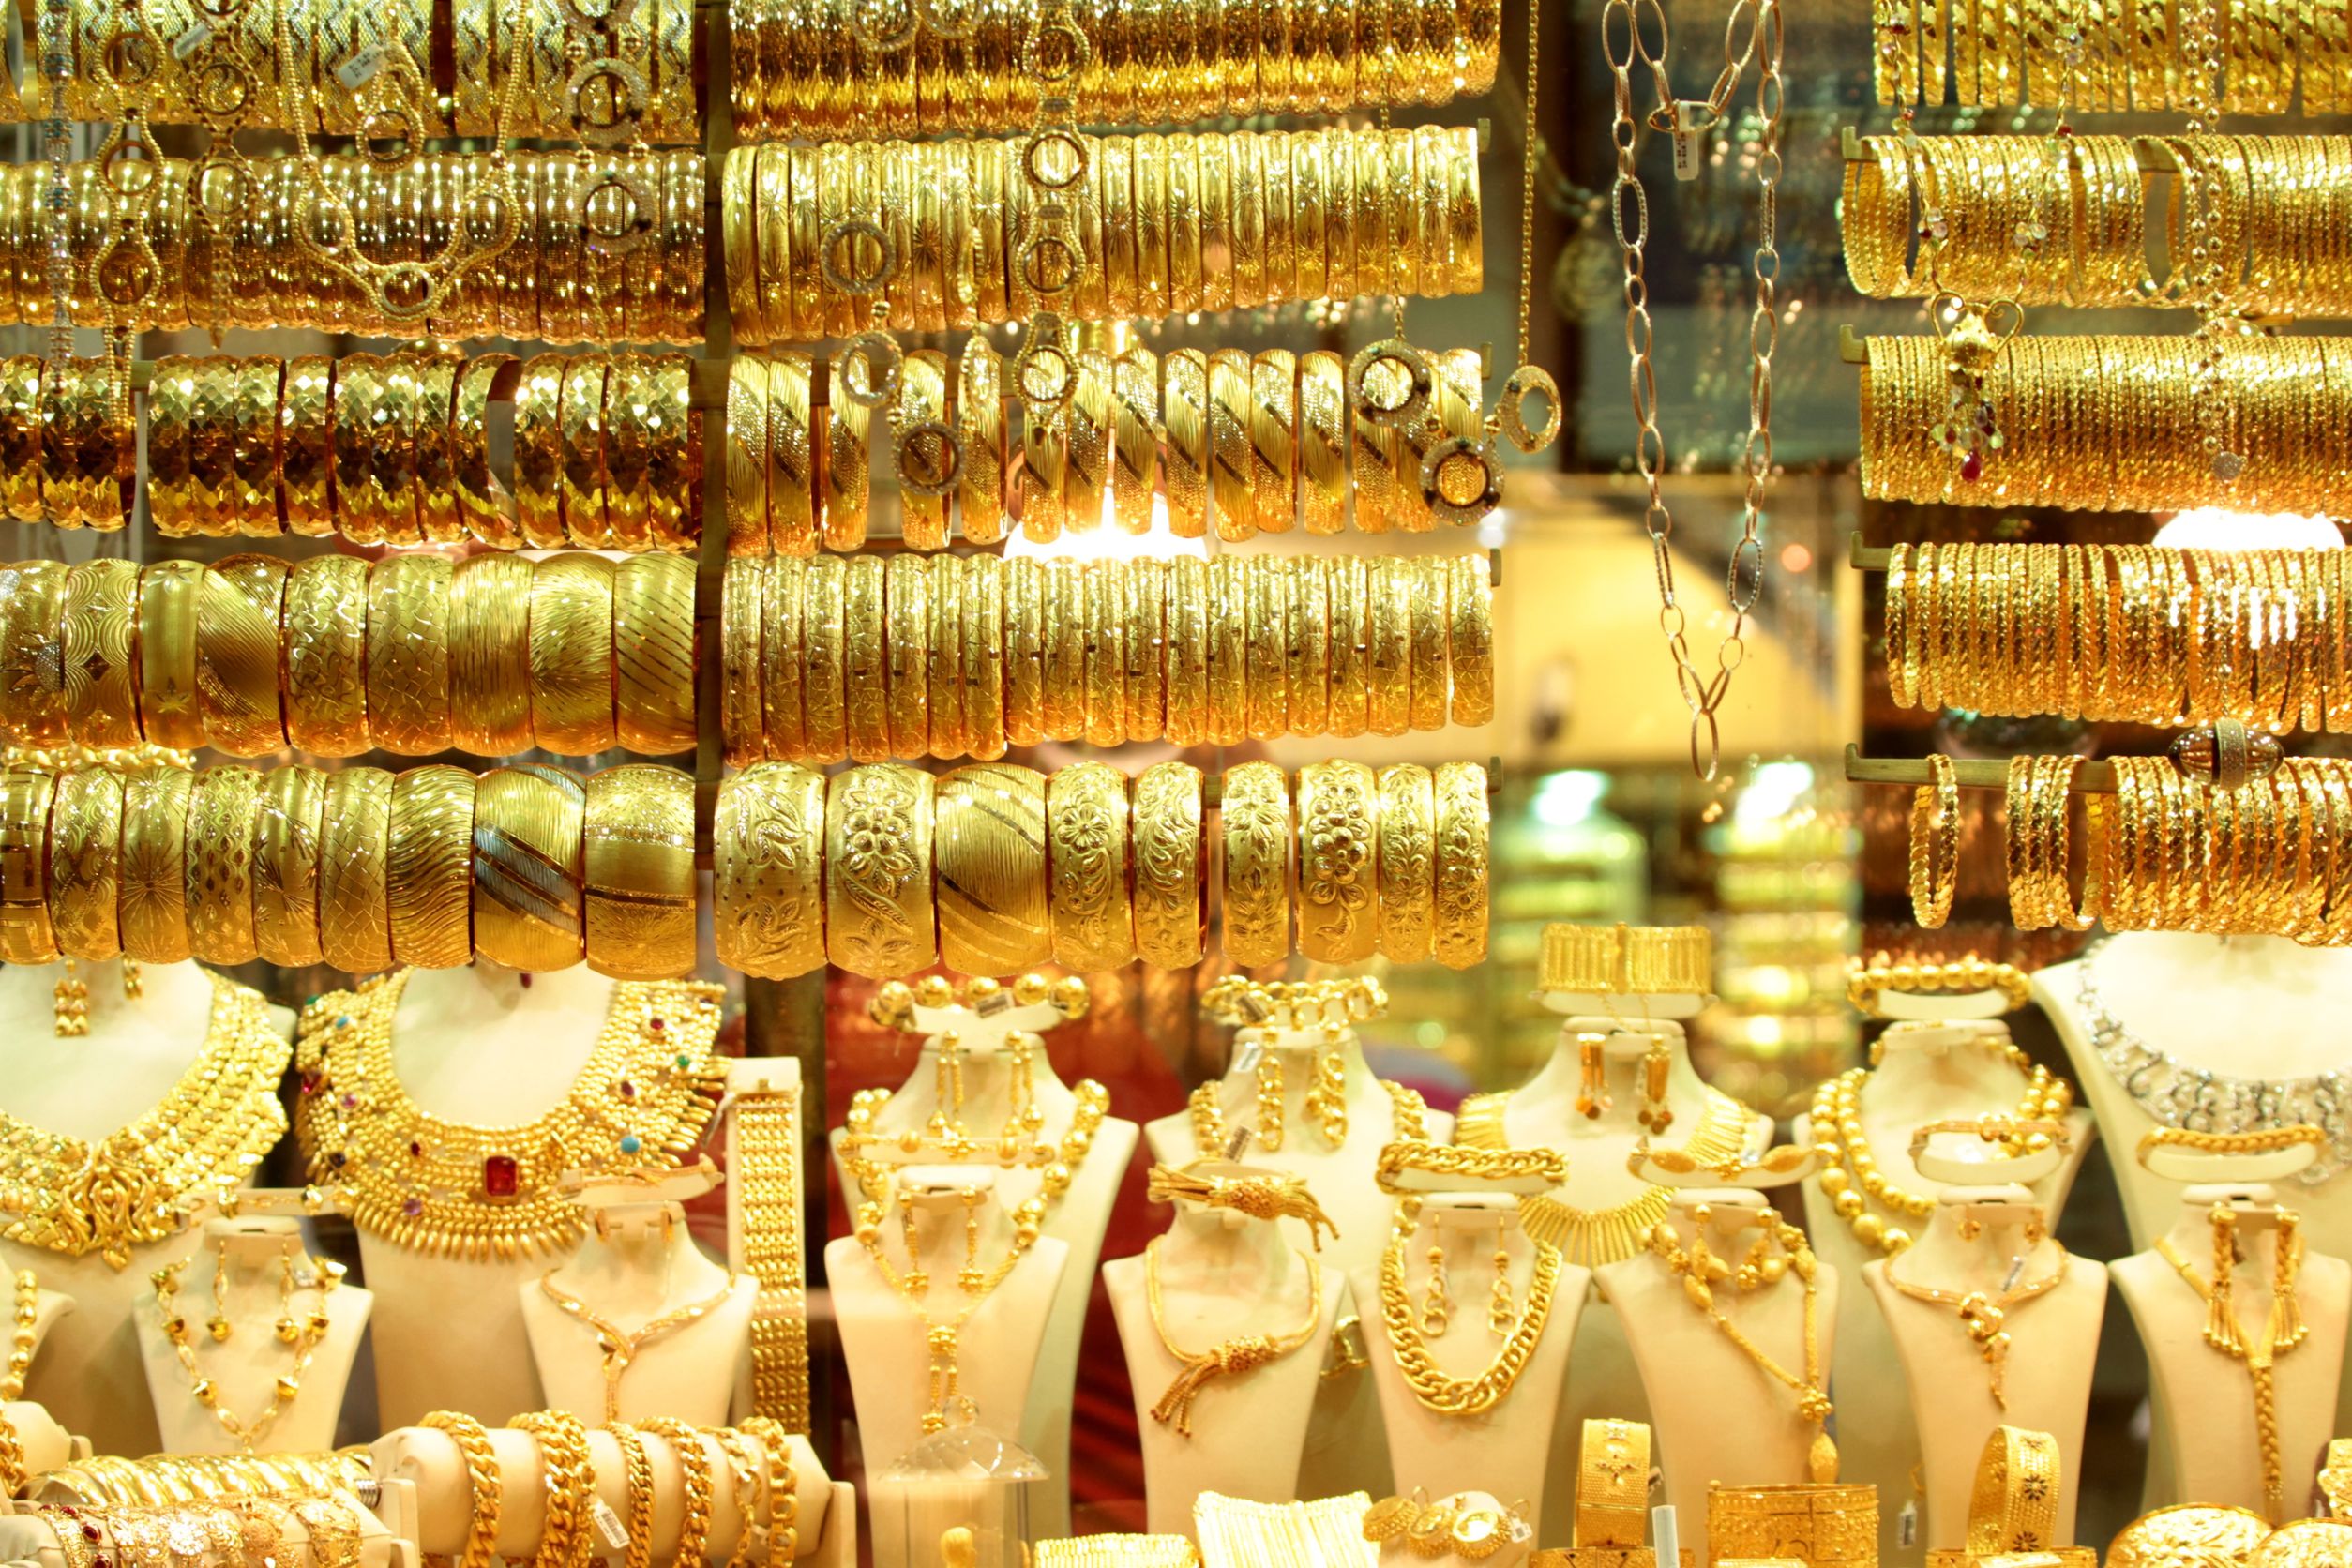 The West Is Losing Control Over the Gold Price